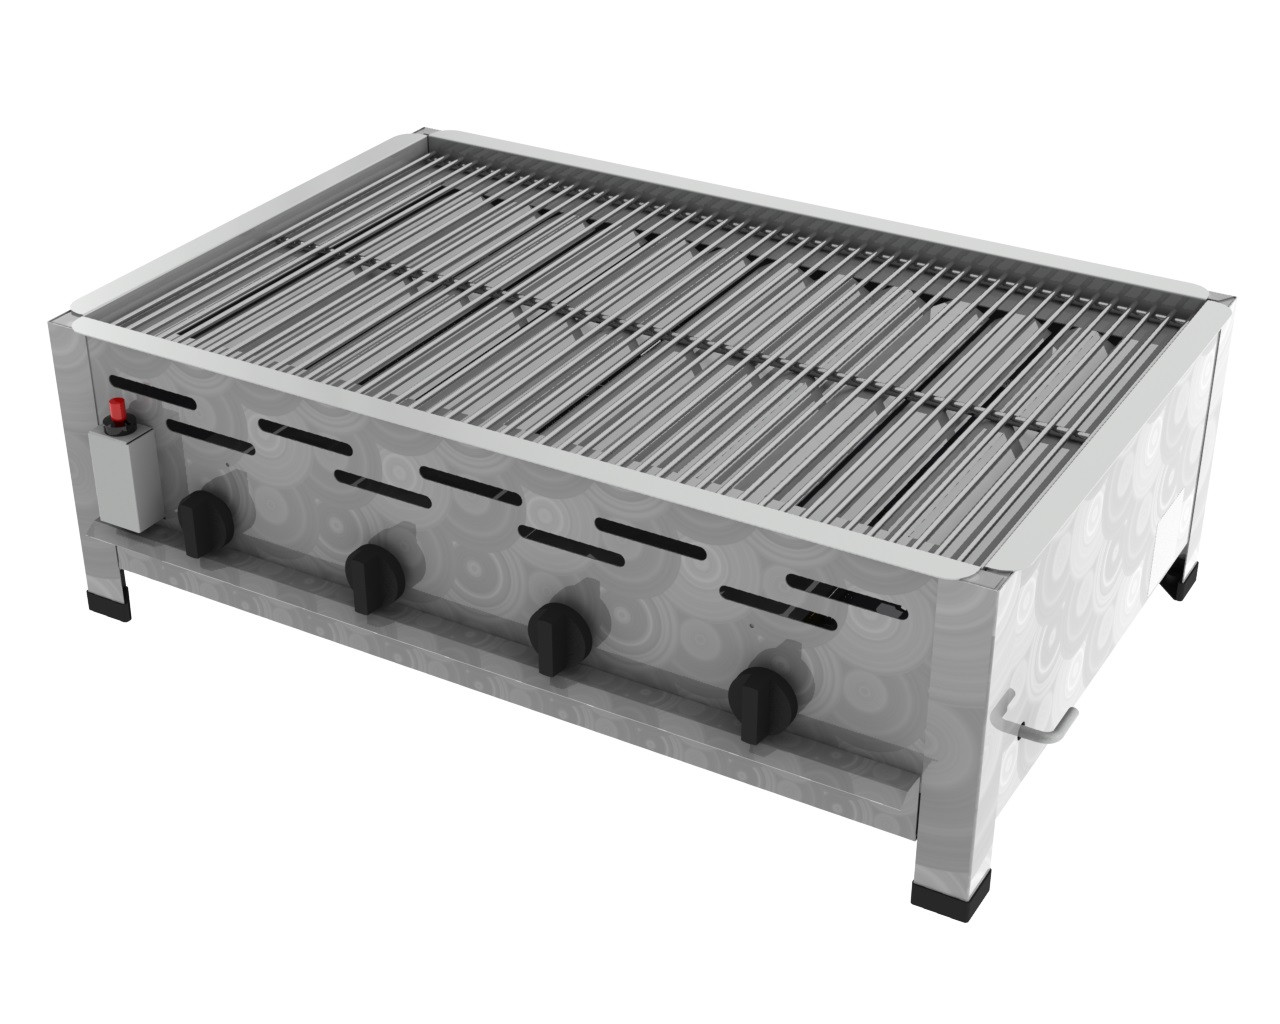 2-flammiger Gasgrill K+F Lavasteingrill mit Propangas Made in Germany 